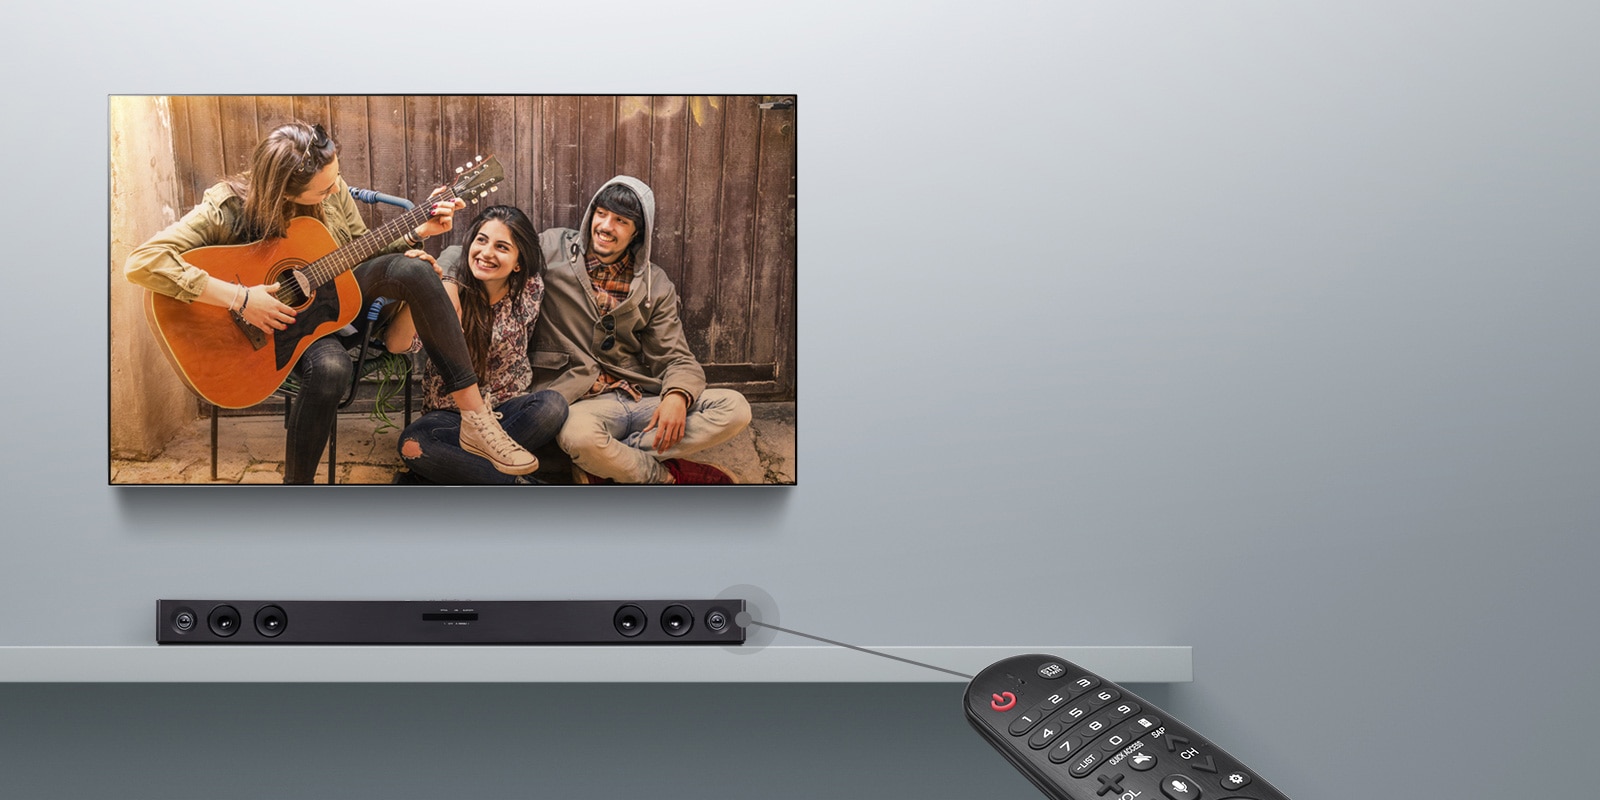 LG TV is hung on the grey wall, displaying a movie scene. And the sound bar is placed below. A remote is shown on the right side of the image. There is a line connected to the sound bar to illustrate that users can control the sound bar with their remote.